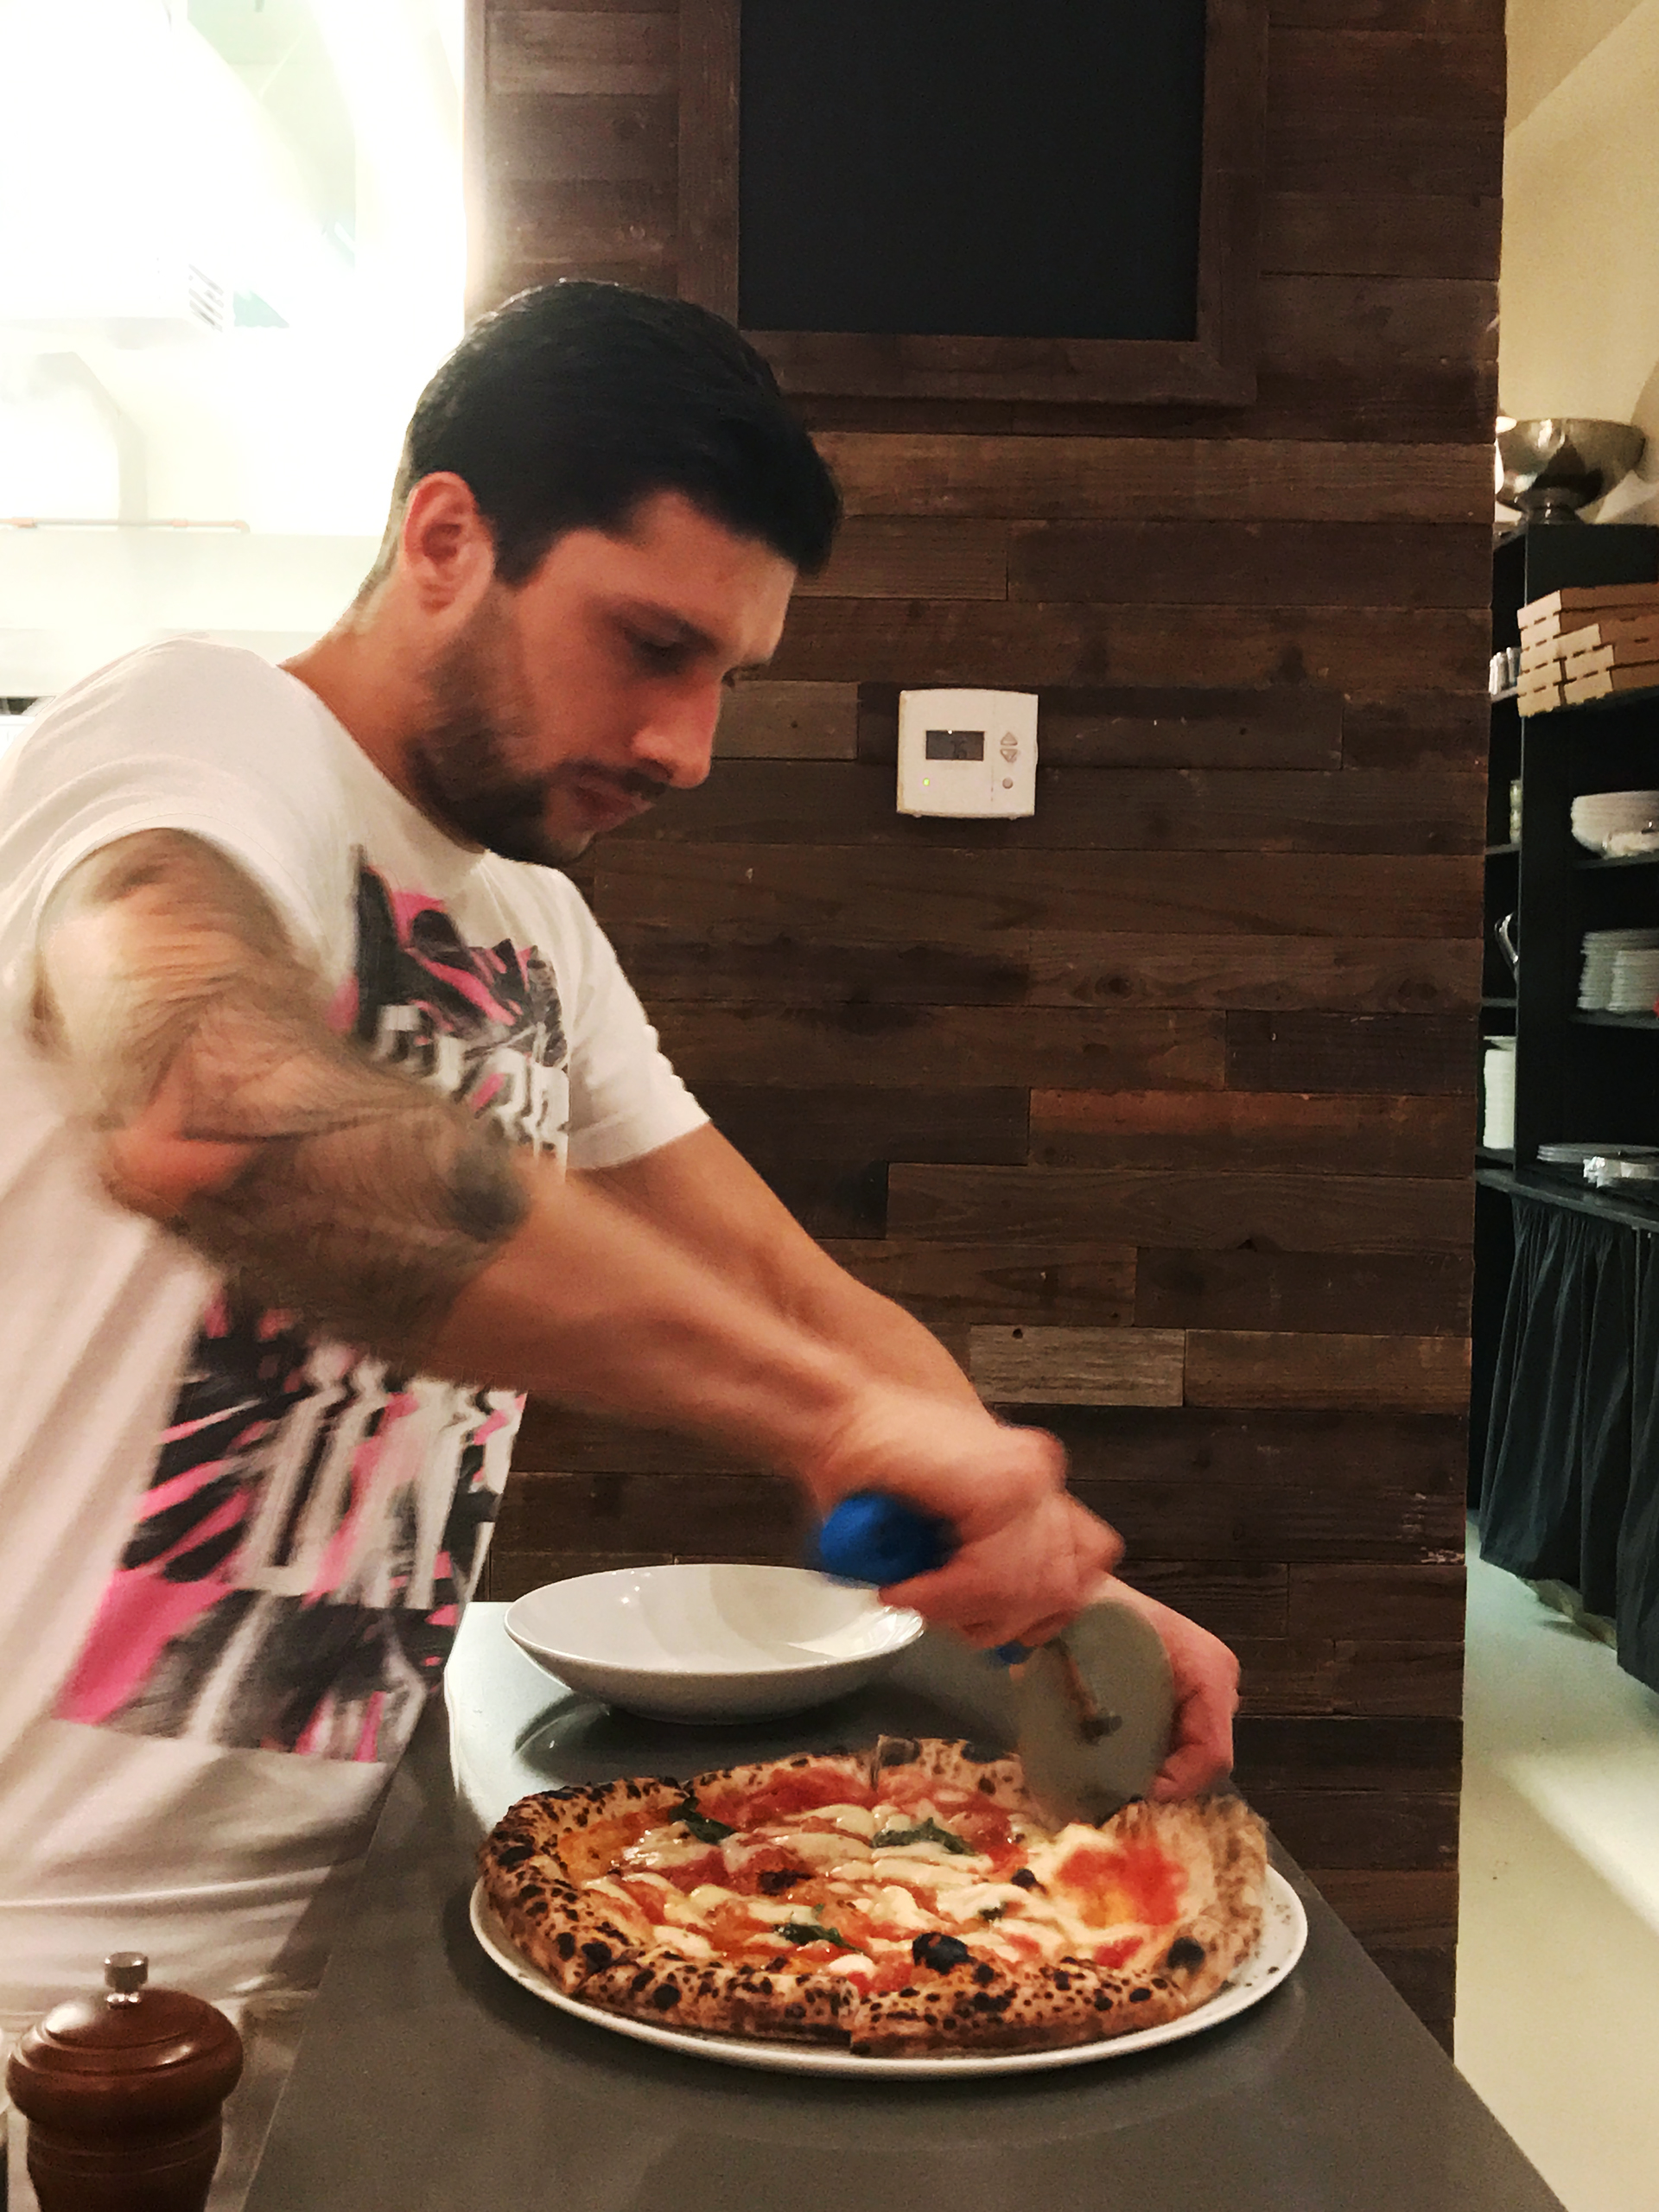 Luciano Passeri cuts into a pizza just before serving.